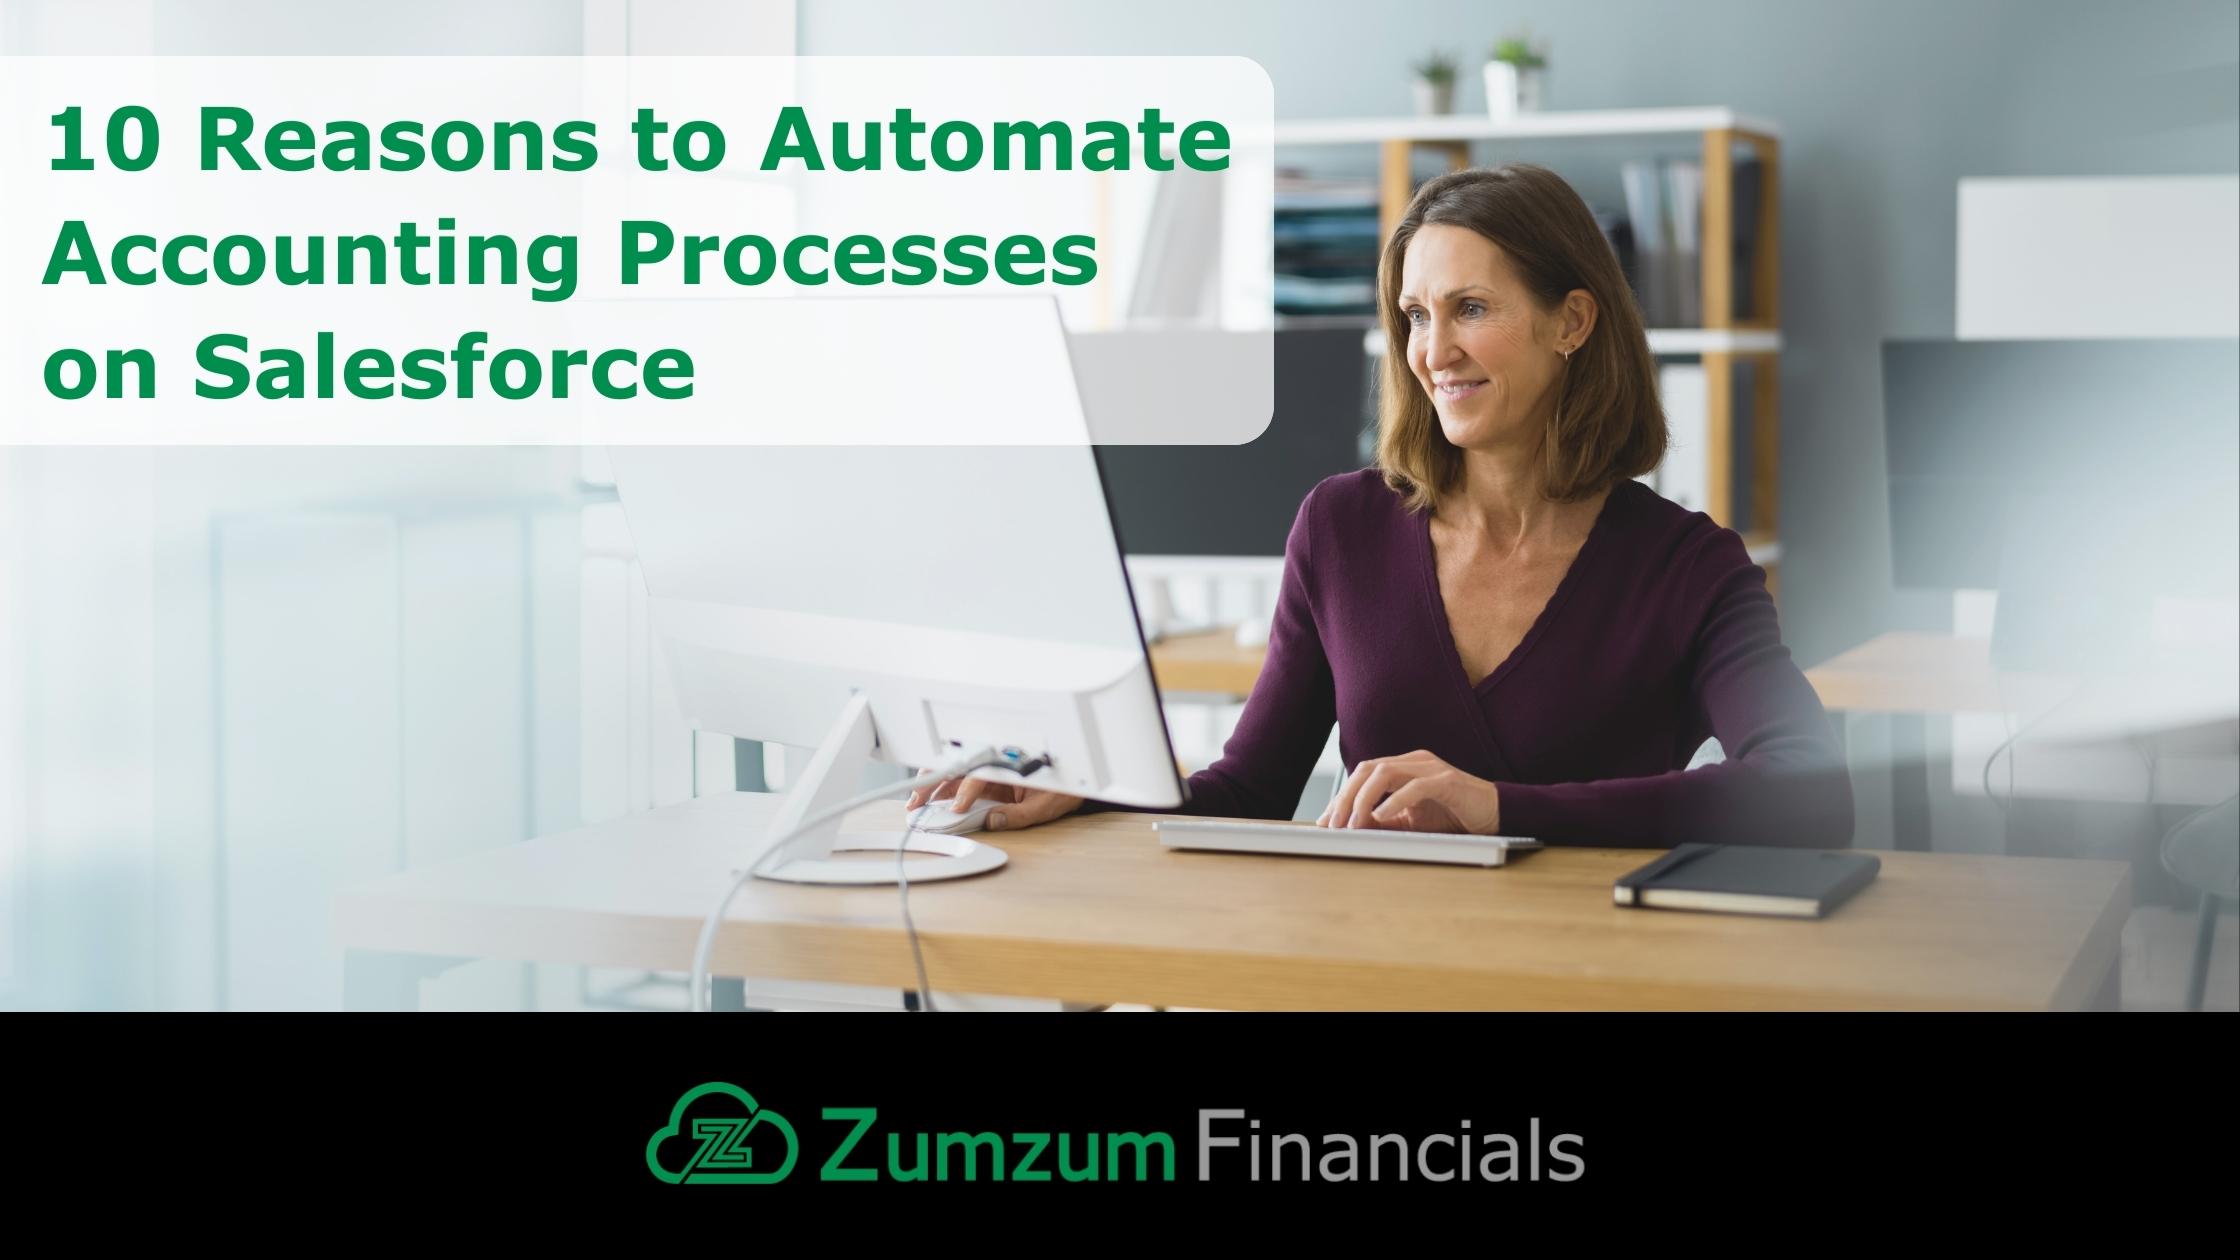 10 Reasons to Automate Accounting Processes on Salesforce